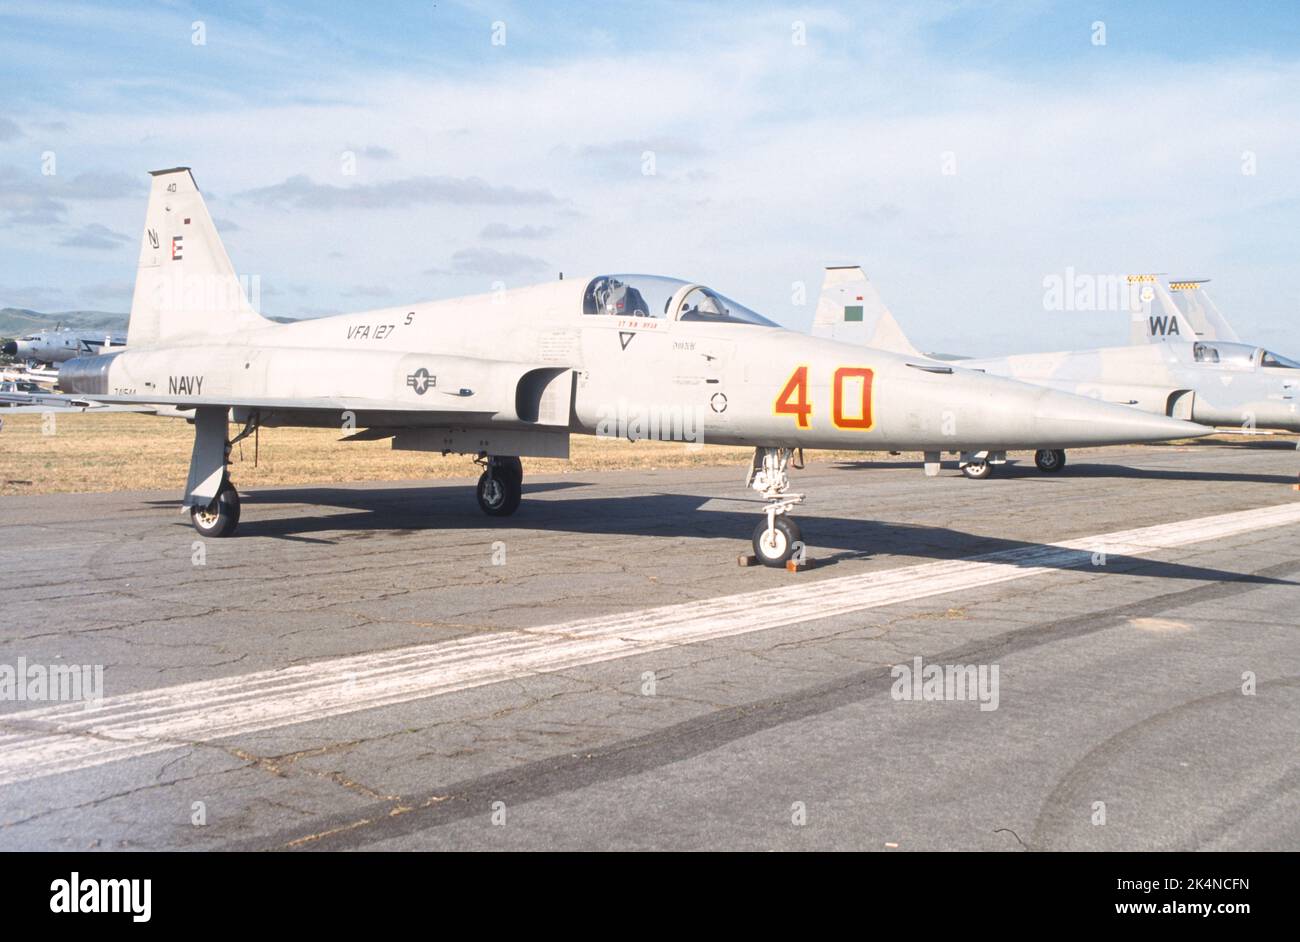 Northup F-5 from VGA-127 displayed on the tarmac at an airshow Stock Photo